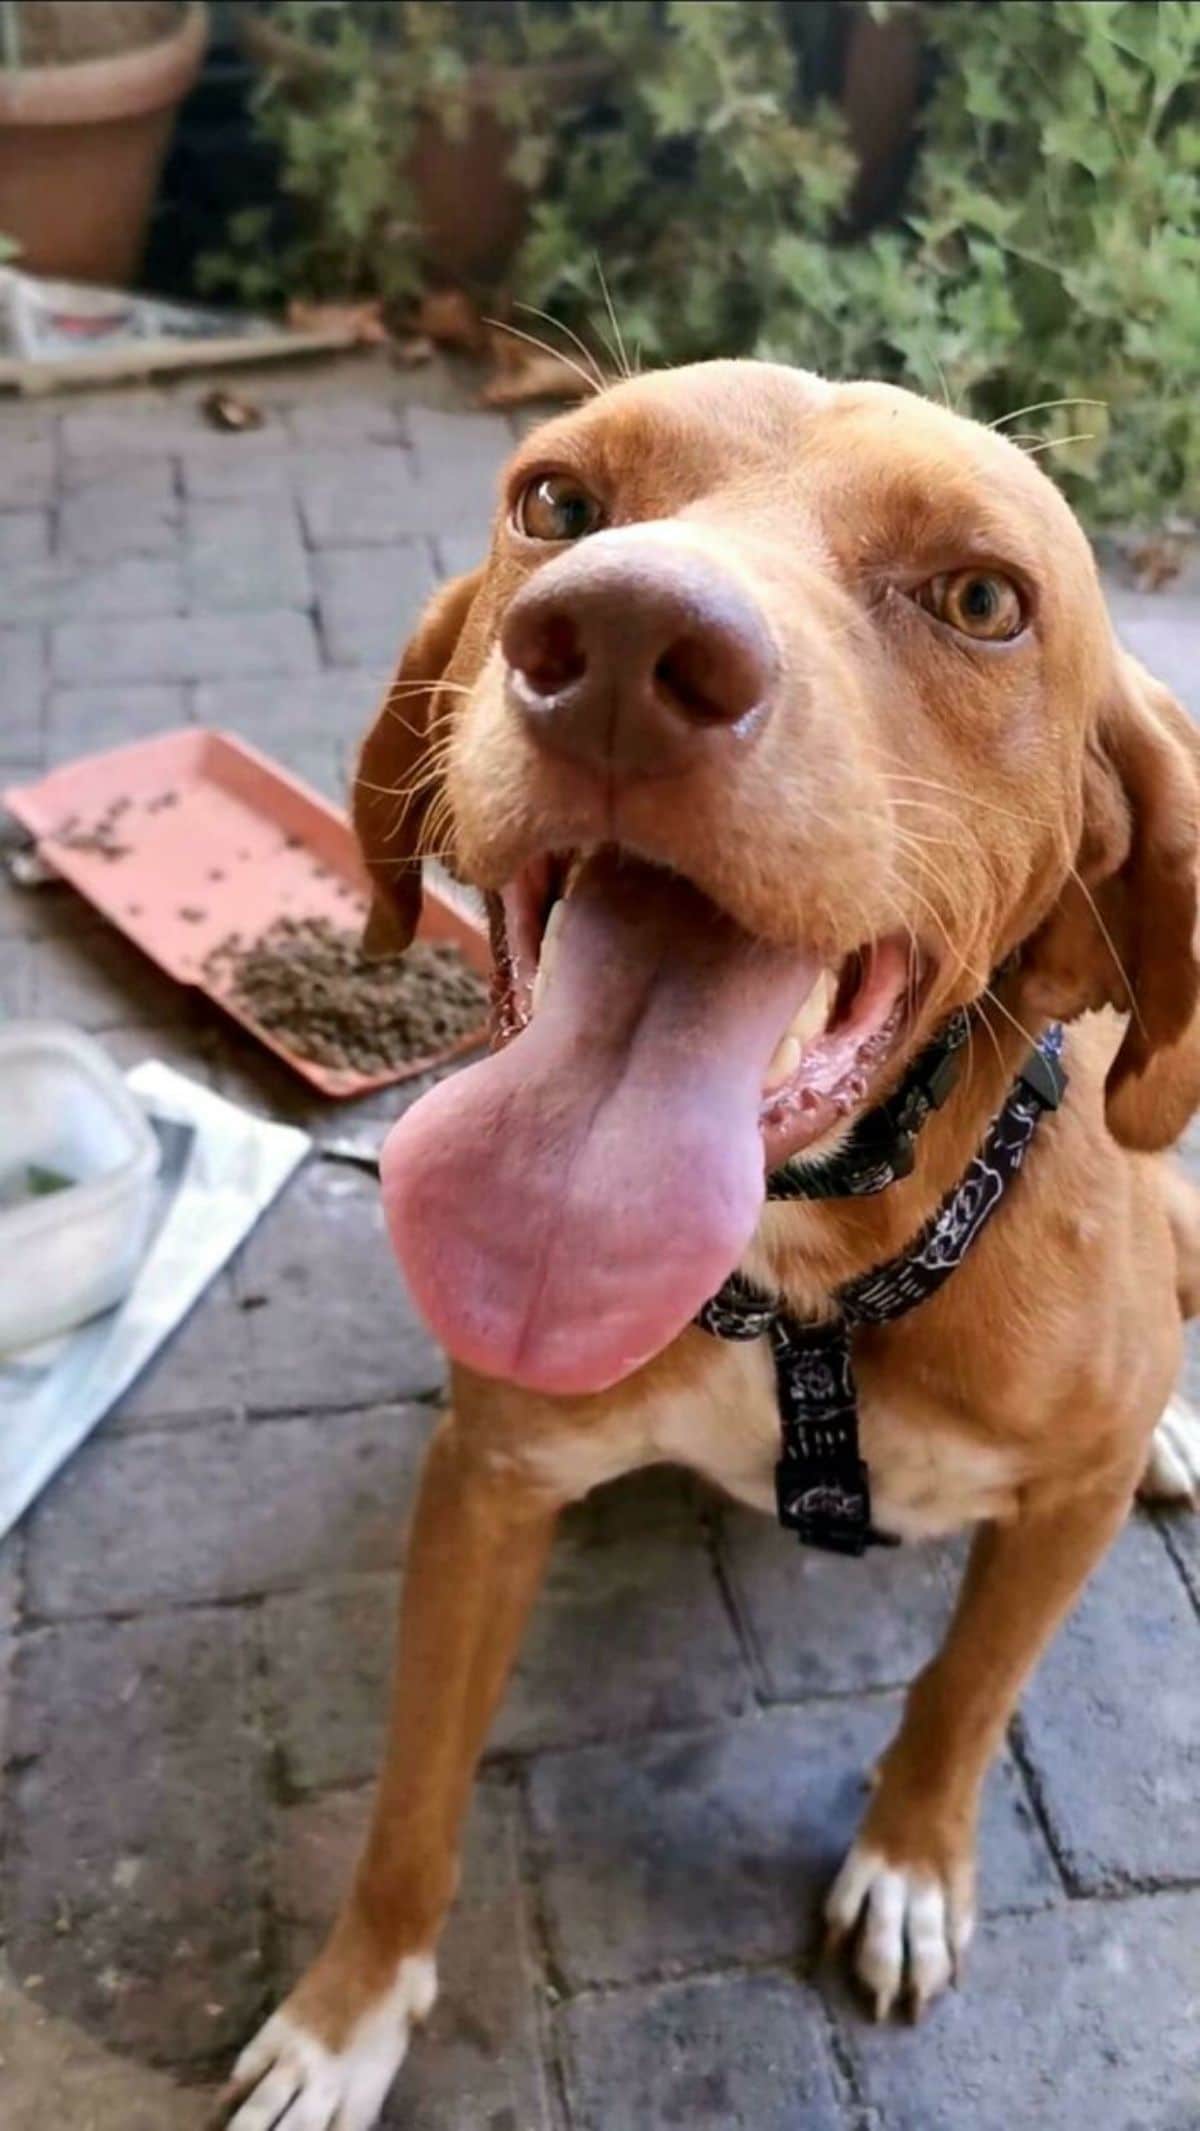 close up of brown smiling dog's face